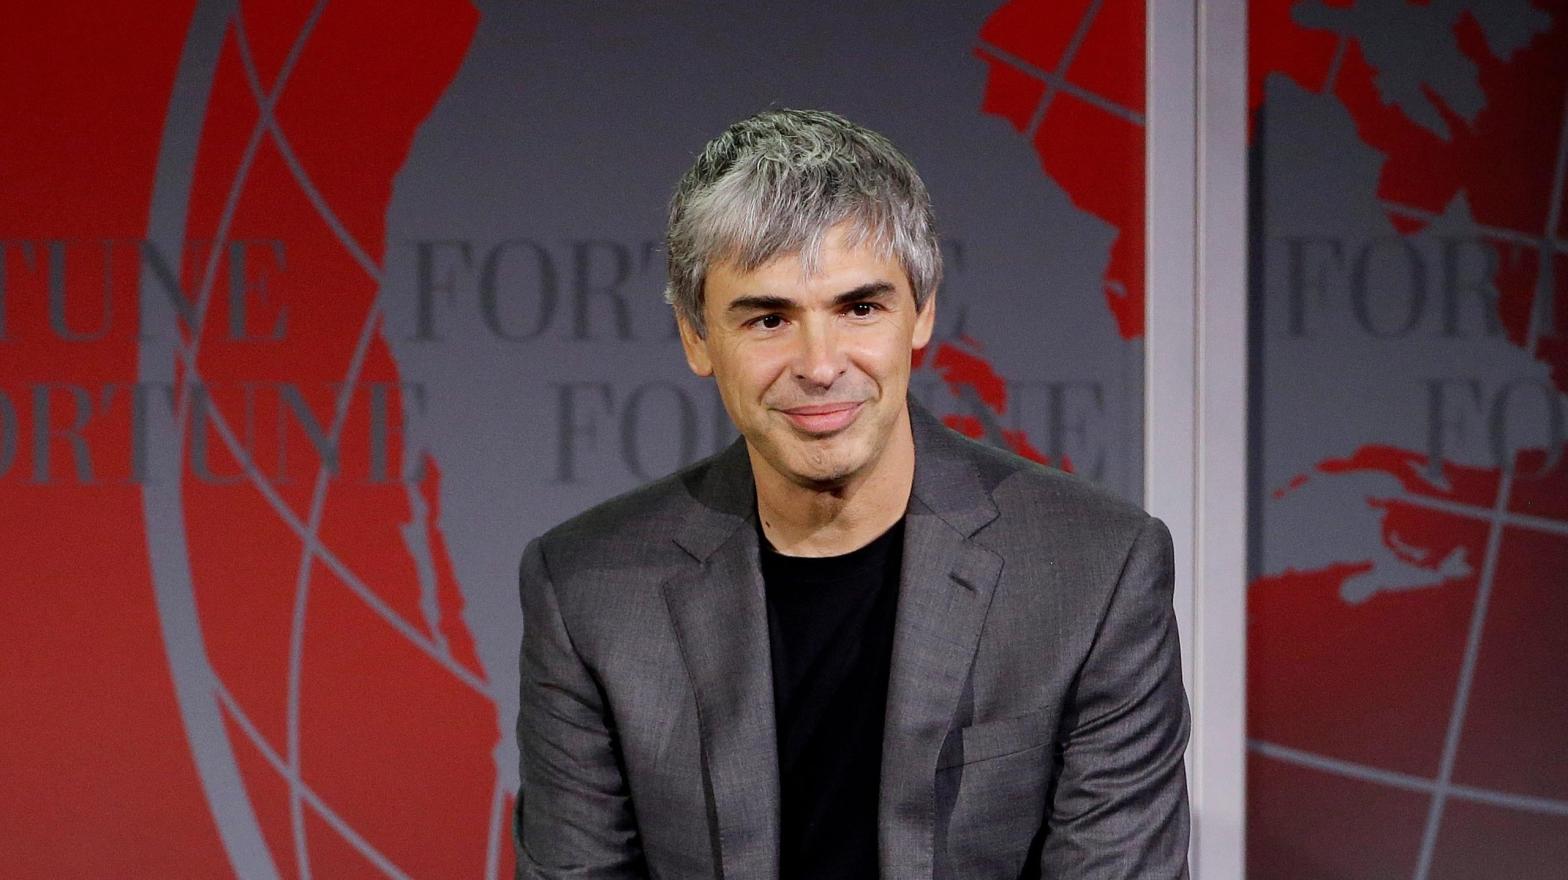 Larry Page speaks at the Fortune Global Forum in San Francisco on Nov. 2, 2015. (Photo: Jeff Chiu, AP)